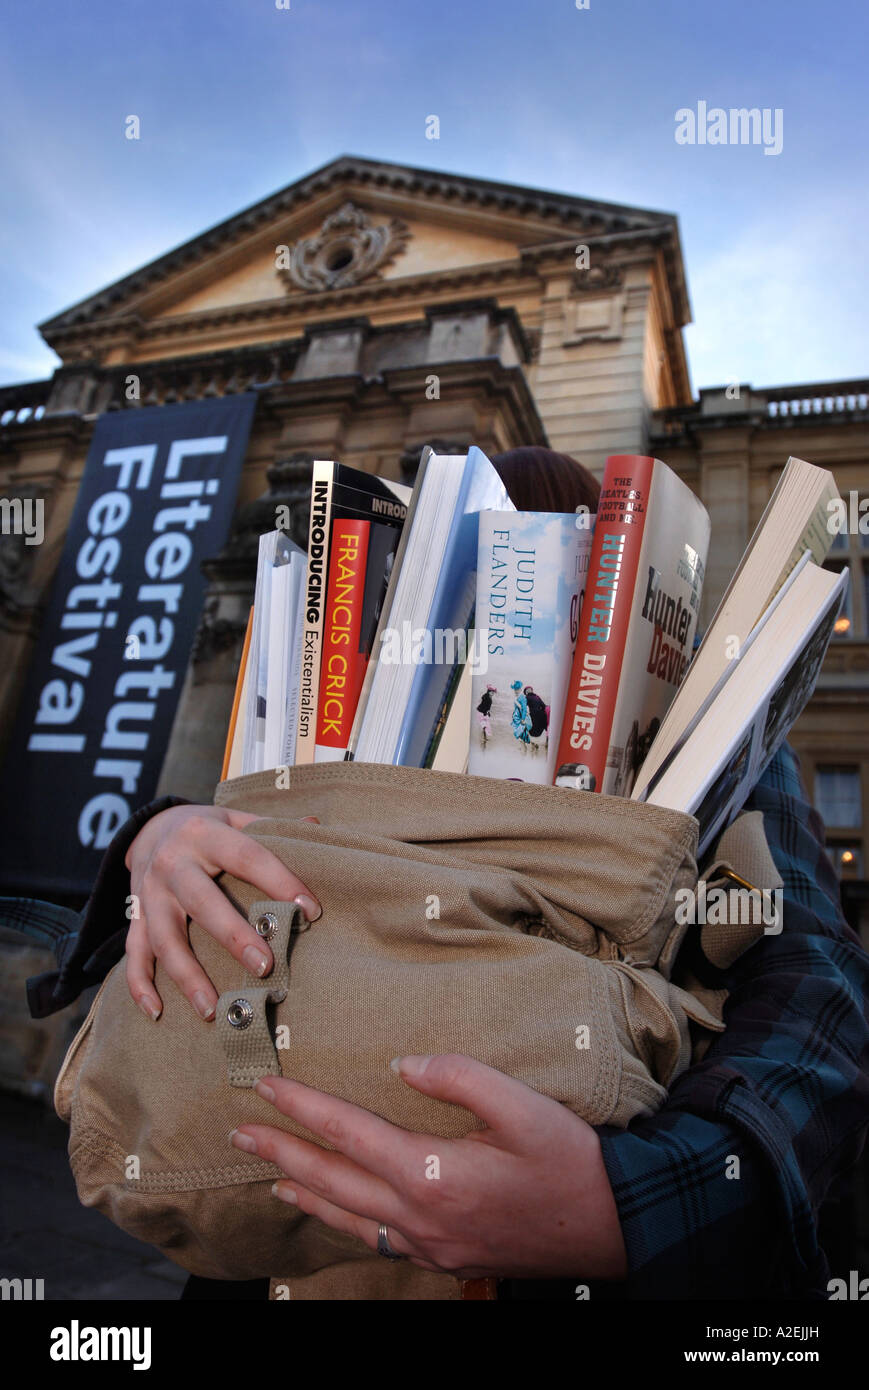 A WOMEN CARRYING A SATCHEL FULL OF BOOKS AT THE CHELTENHAM LITERATURE FESTIVAL UK OCT 2006 Stock Photo